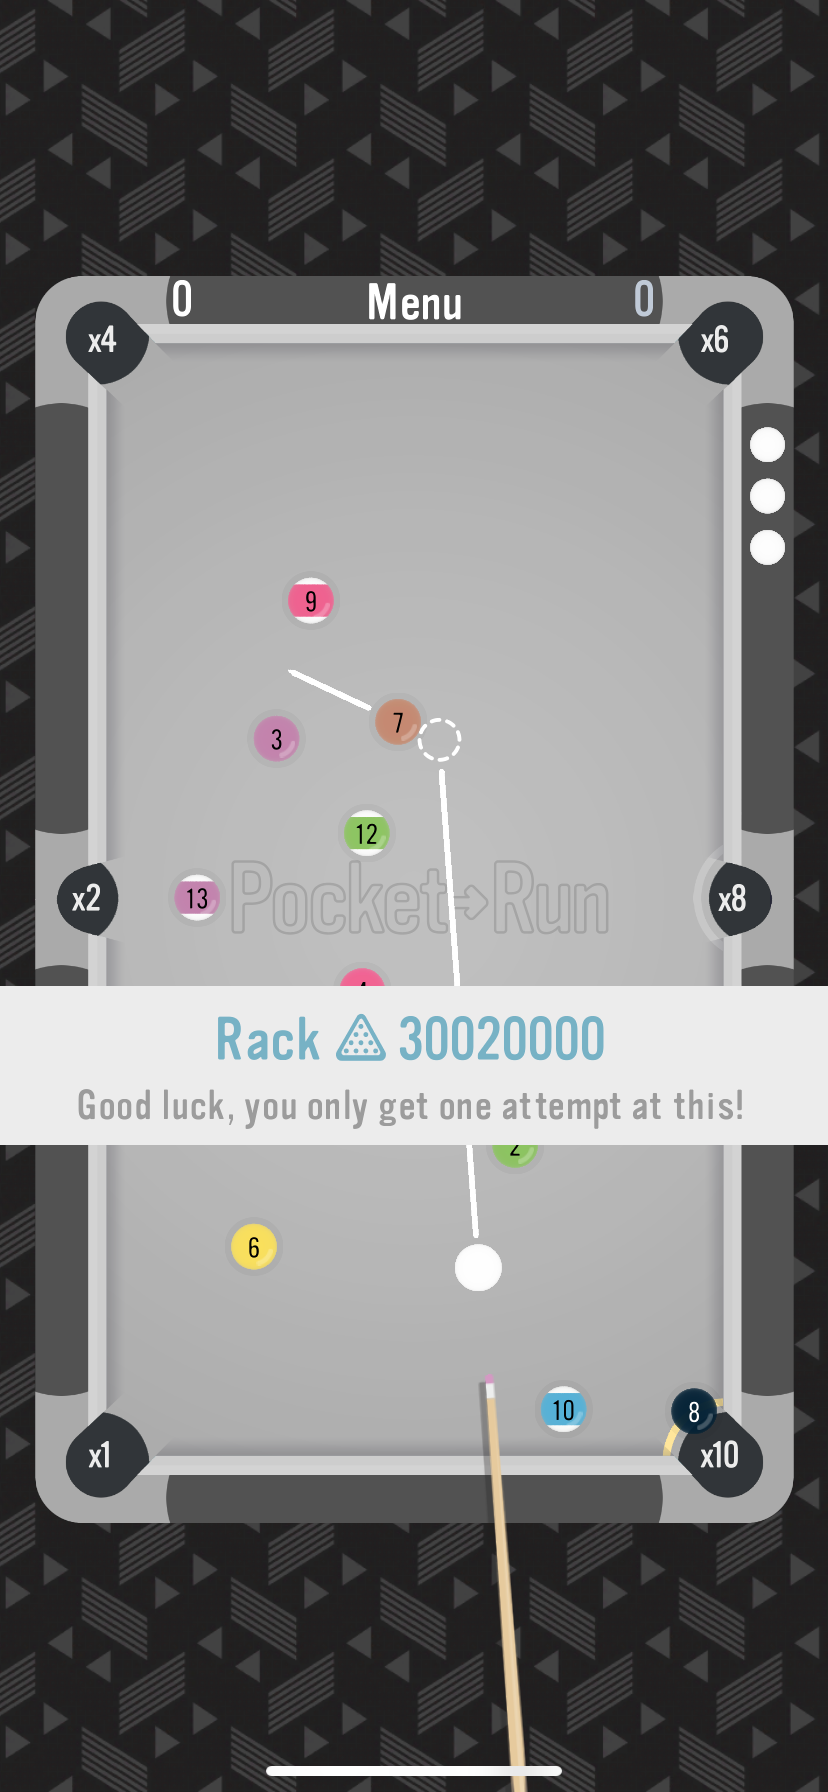 Pocket Run Pool' Review – Help Me, I Can't Stop Playing – TouchArcade